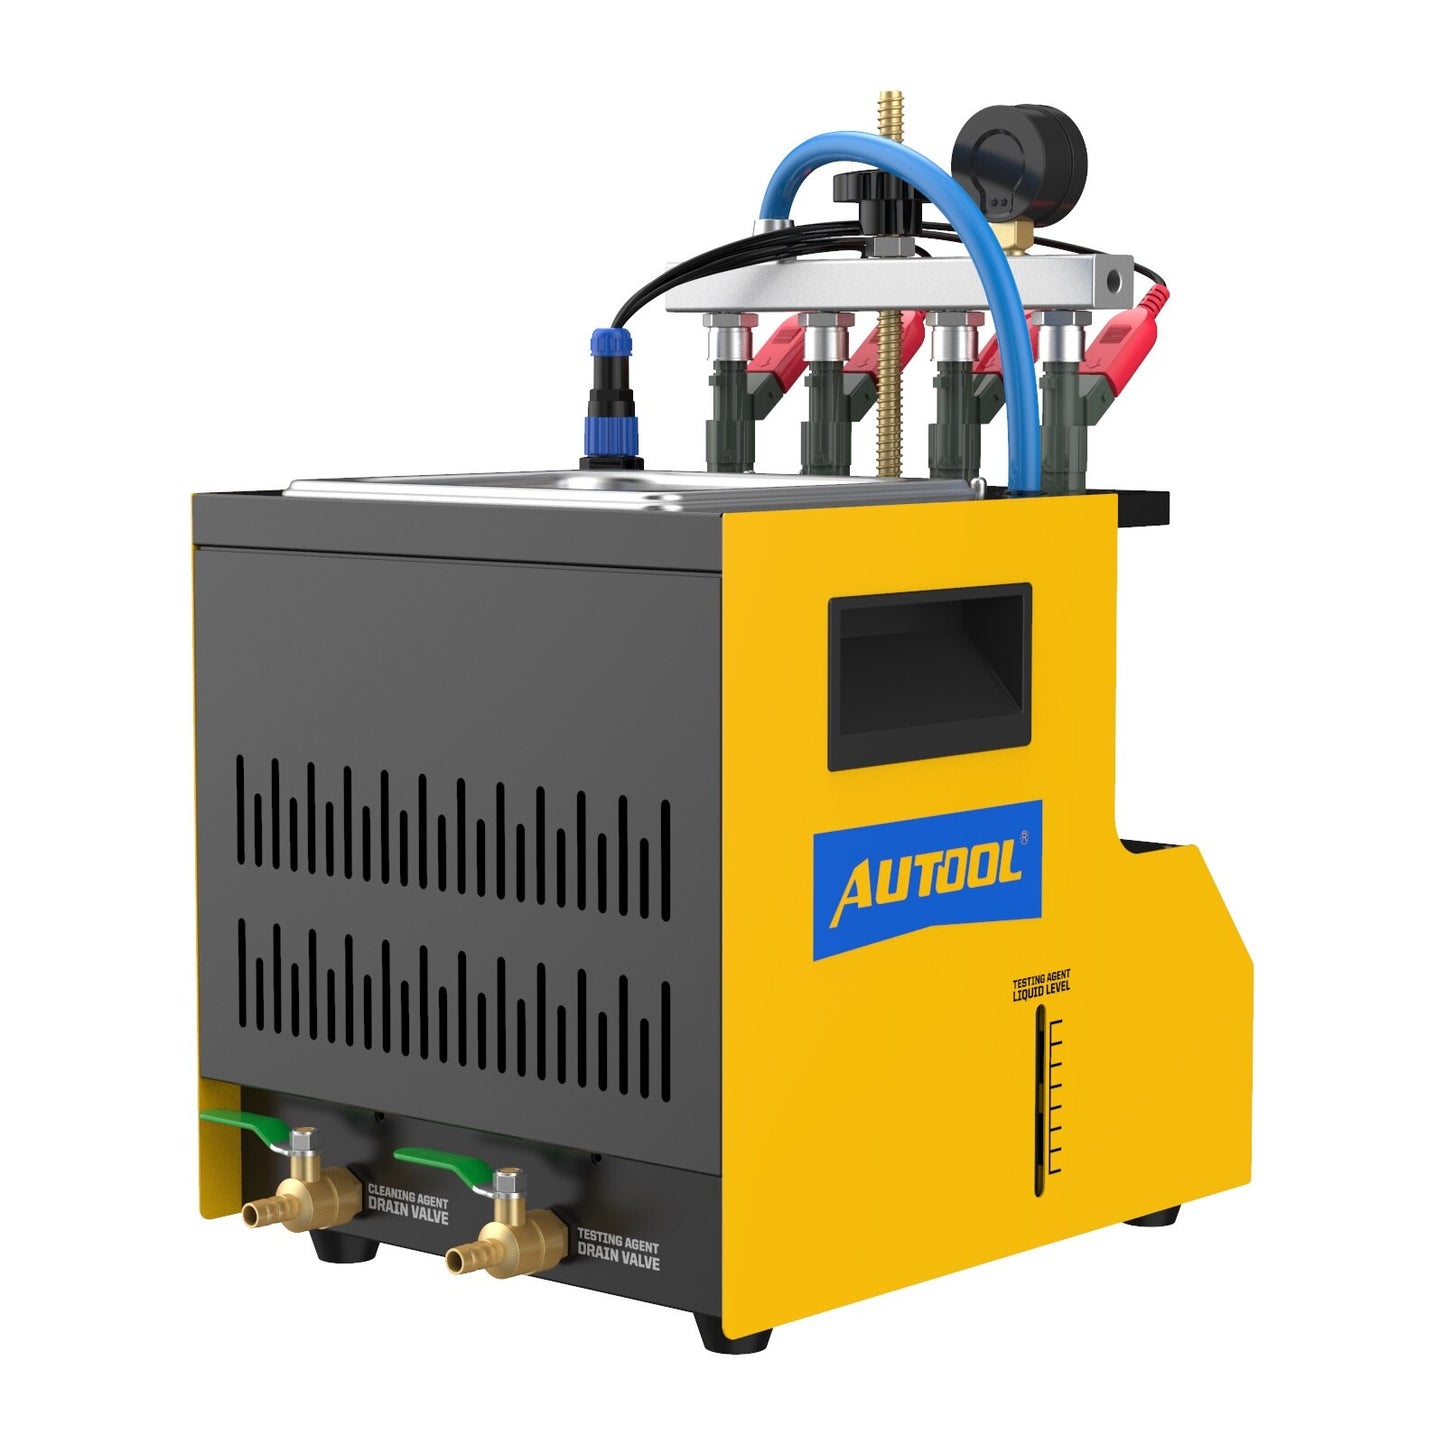 AUTOOL CT160 Fuel Injector Heating Ultrasonic Cleaner & Tester Machine